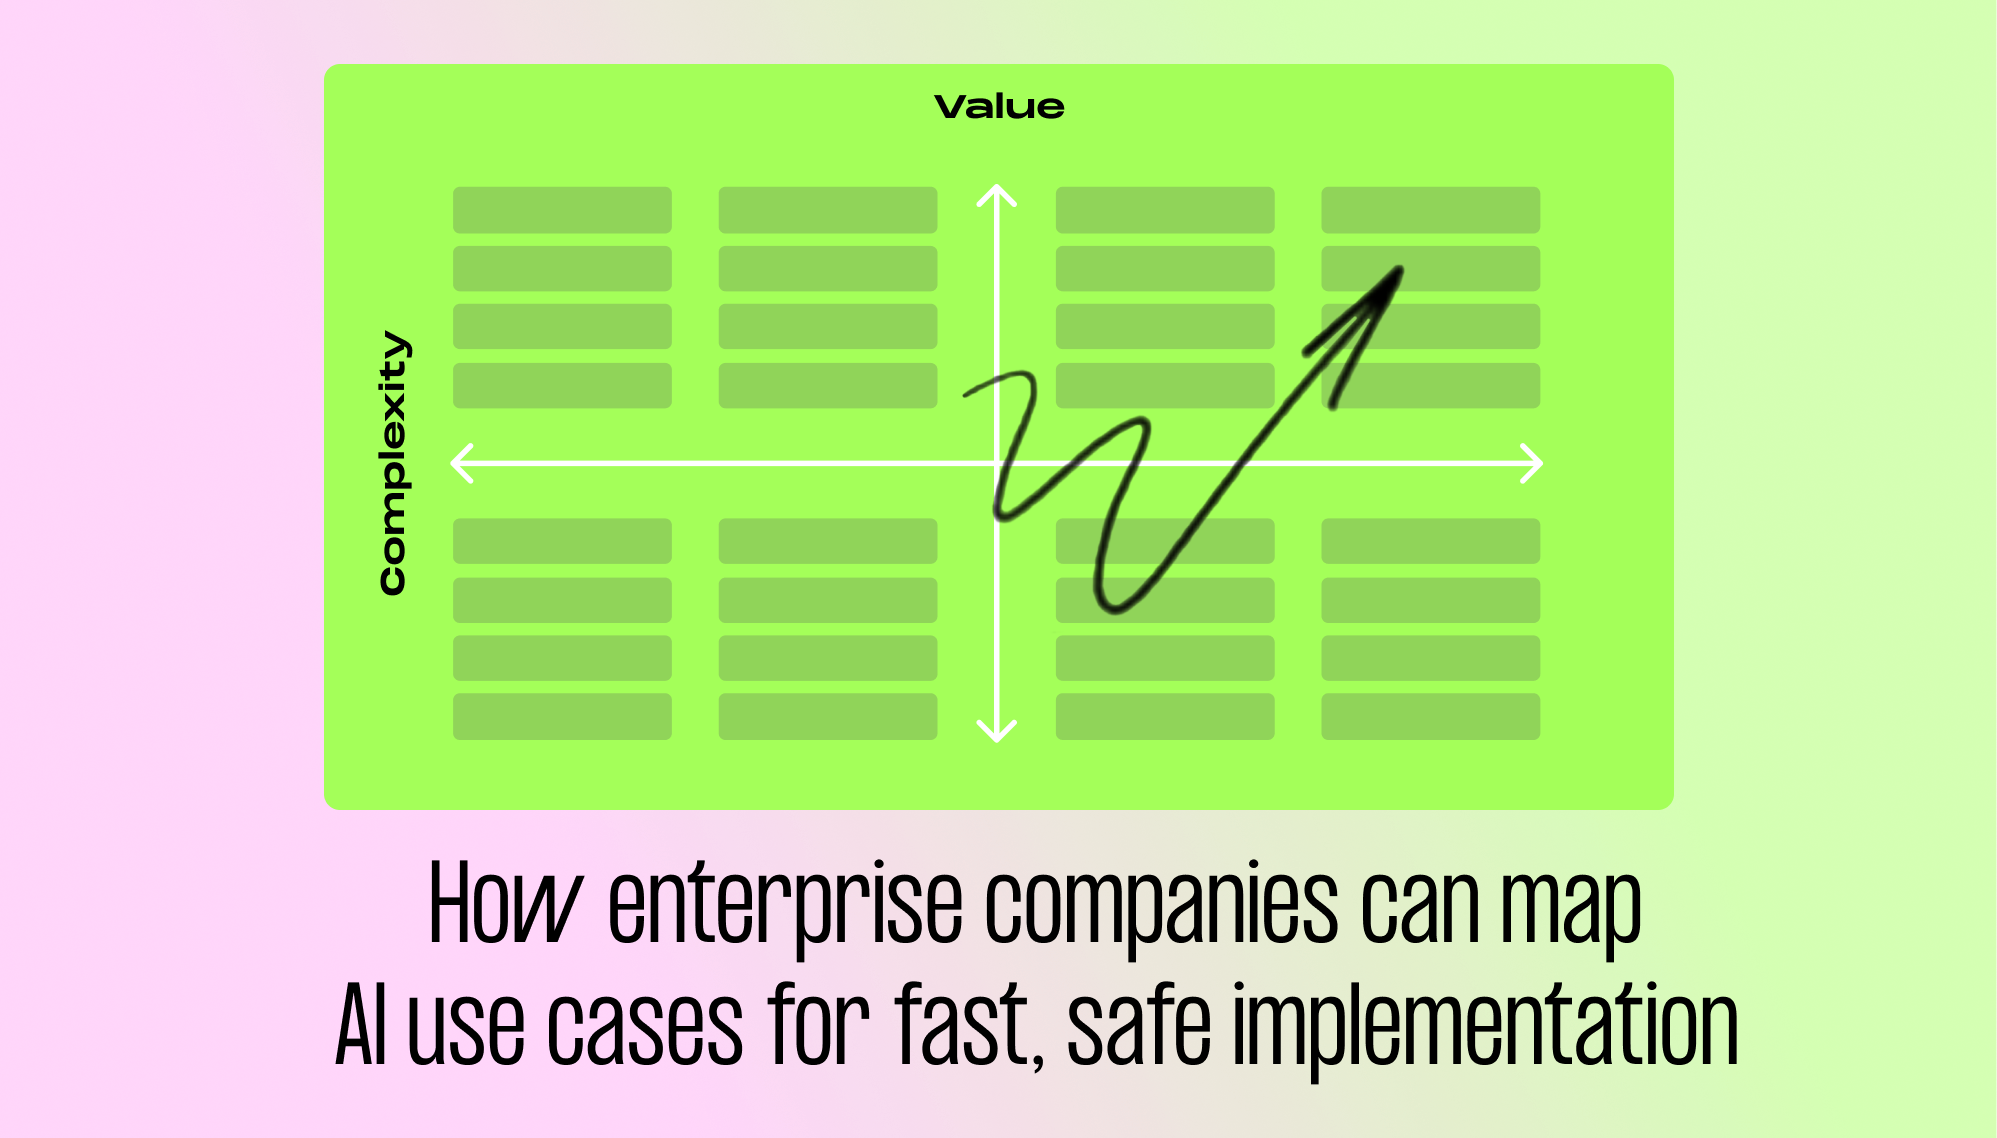 How enterprise companies can map generative AI use cases for fast, safe implementation